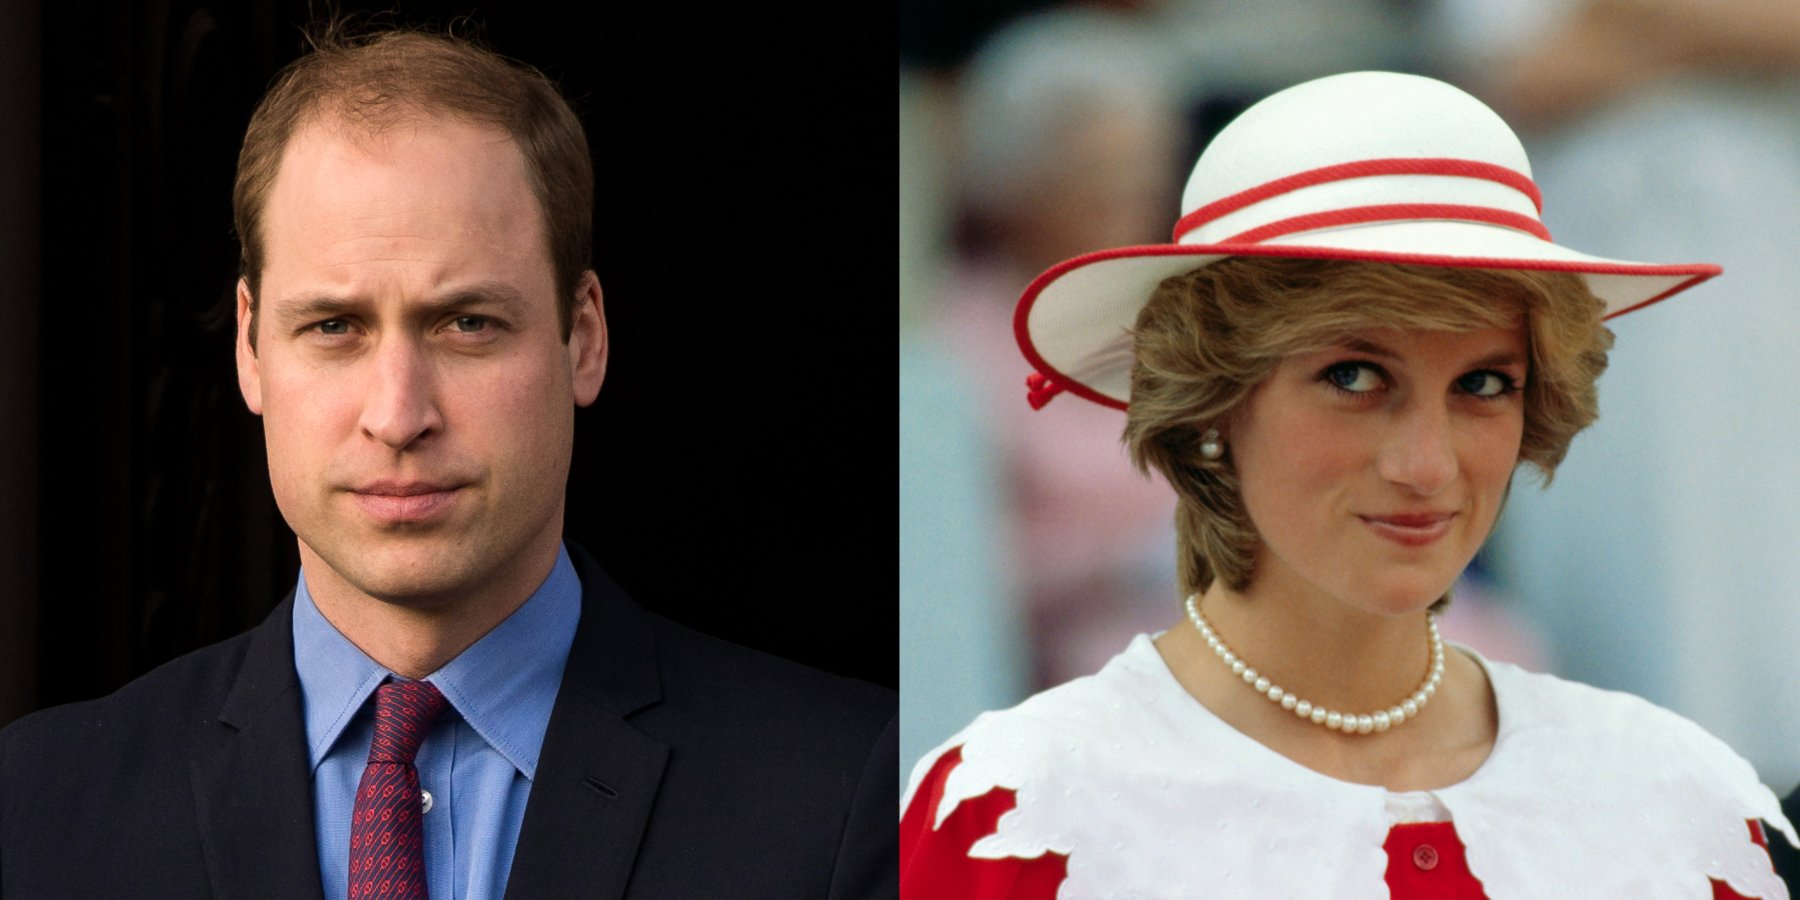 Prince William and Princess Diana in side by side photographs.